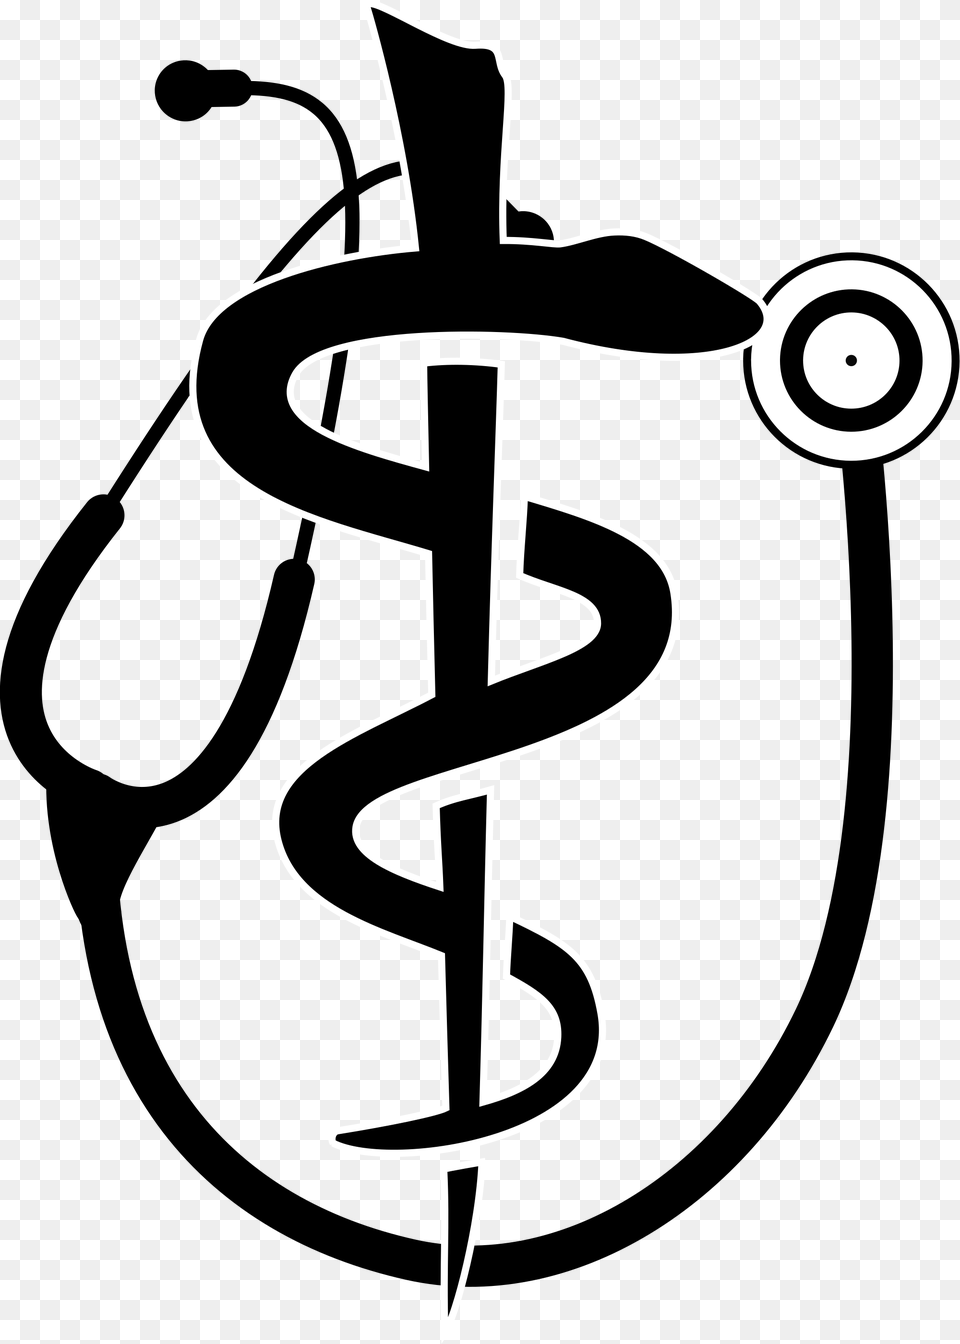 Stethoscope And Rod Of Asclepius, Spiral, Stencil, Cross, Symbol Png Image